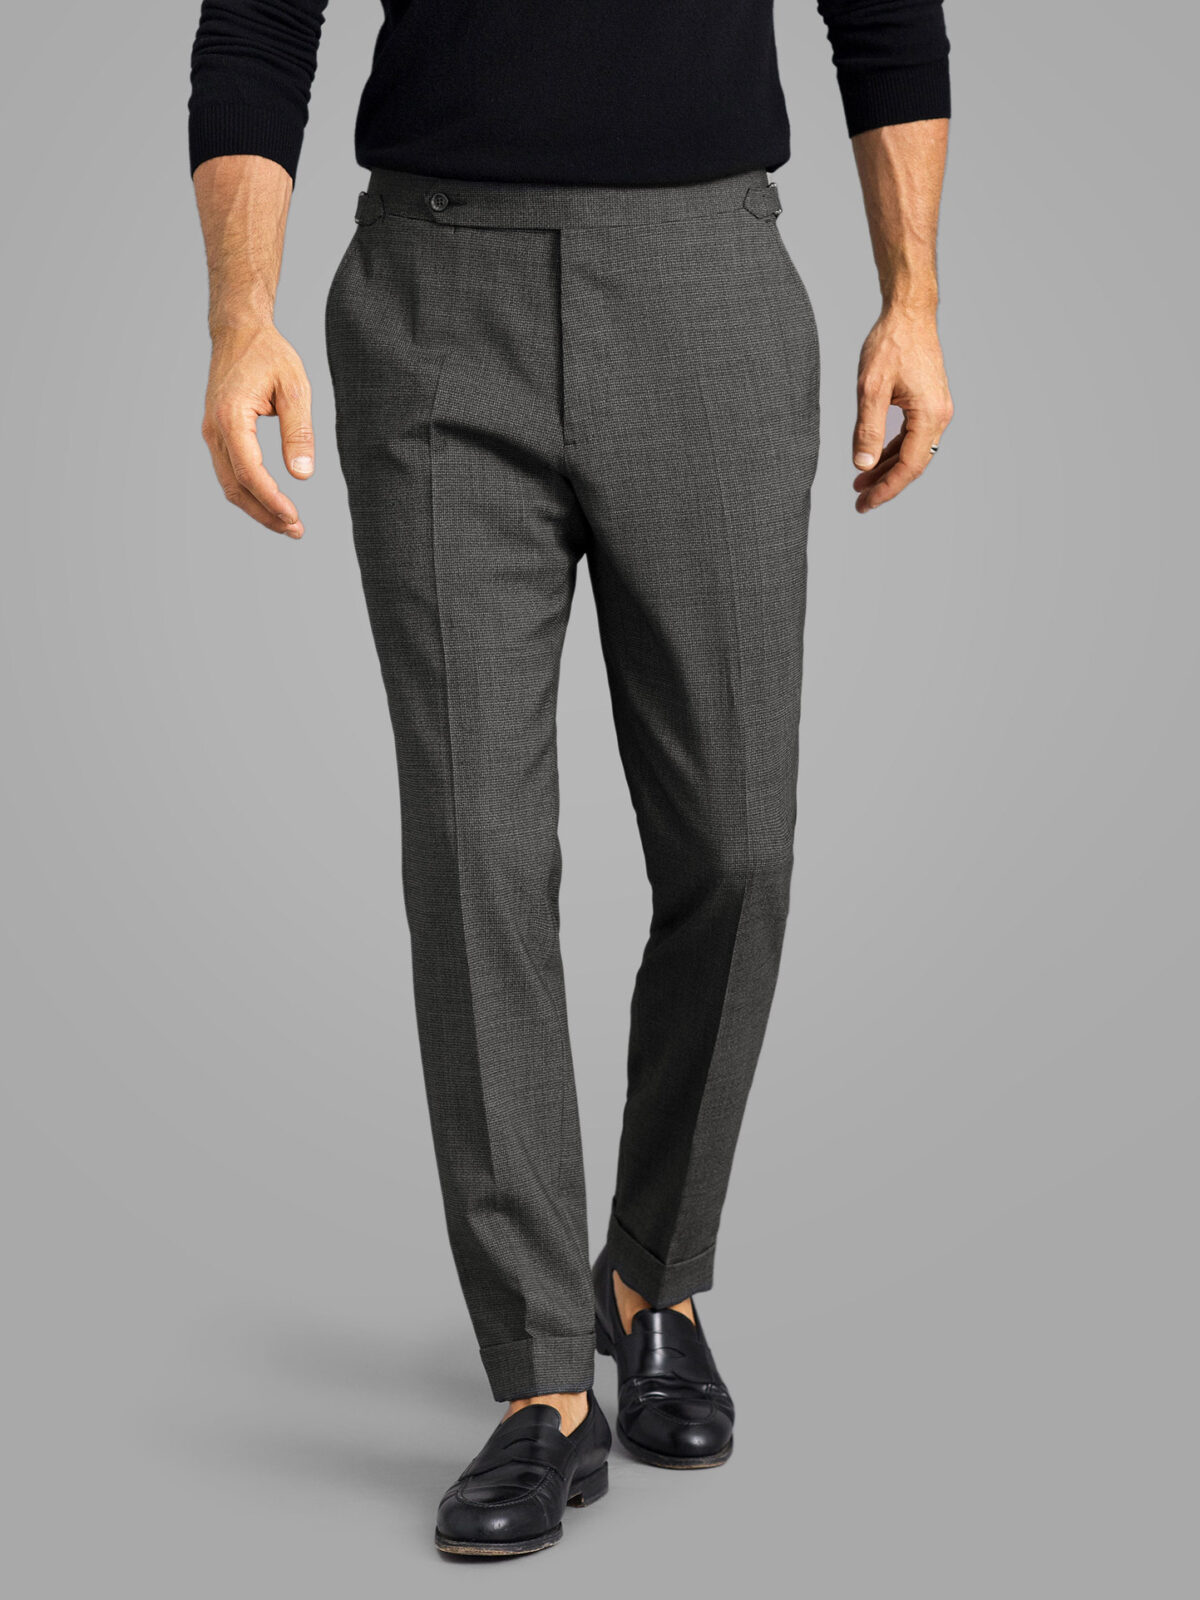 Grey Textured Weave Wool Stretch Dress Pant - Custom Fit Tailored